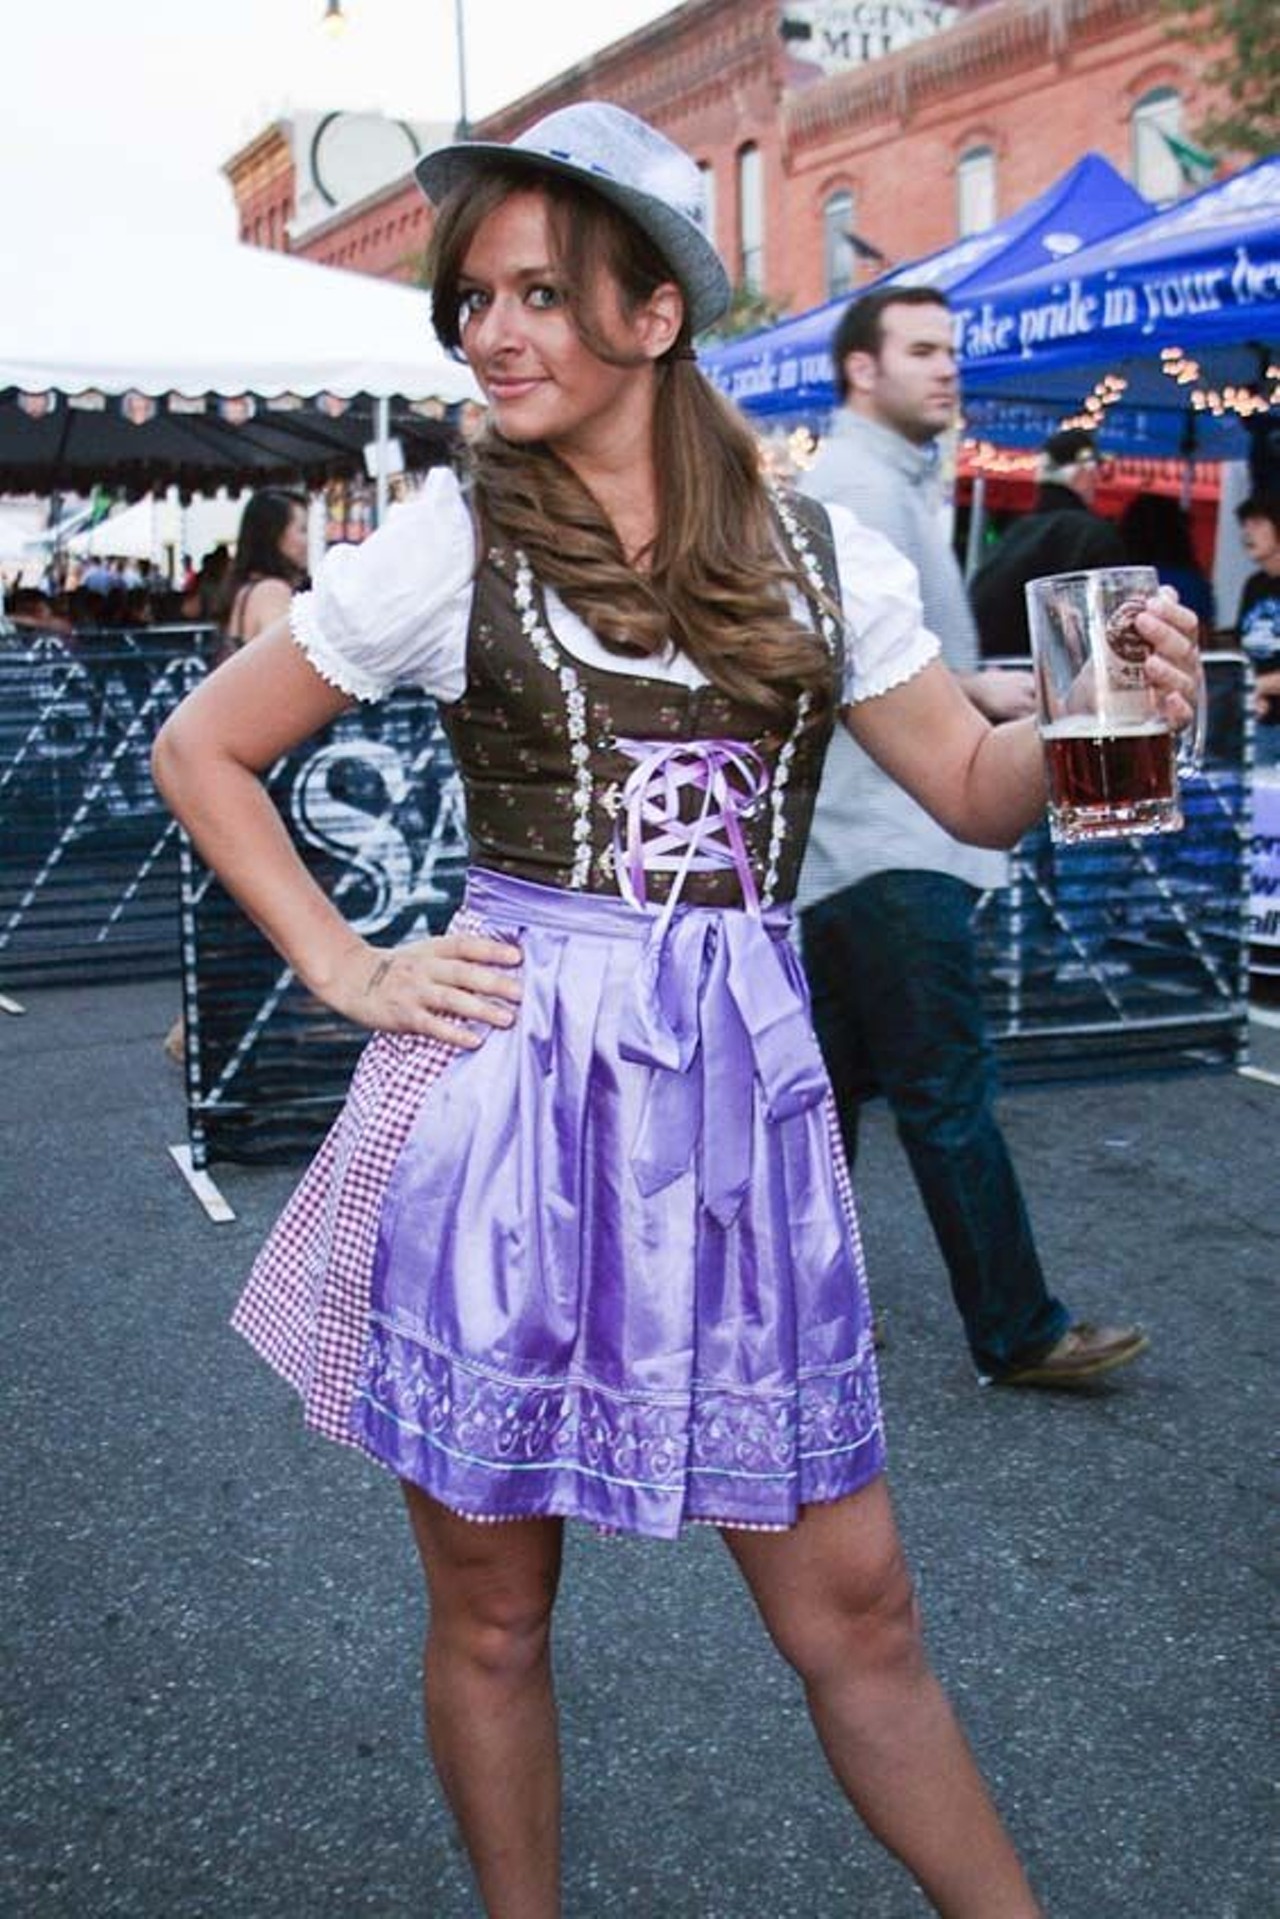 From the People of Oktoberfest Denver 2012 gallery, published by Denver's Westword.